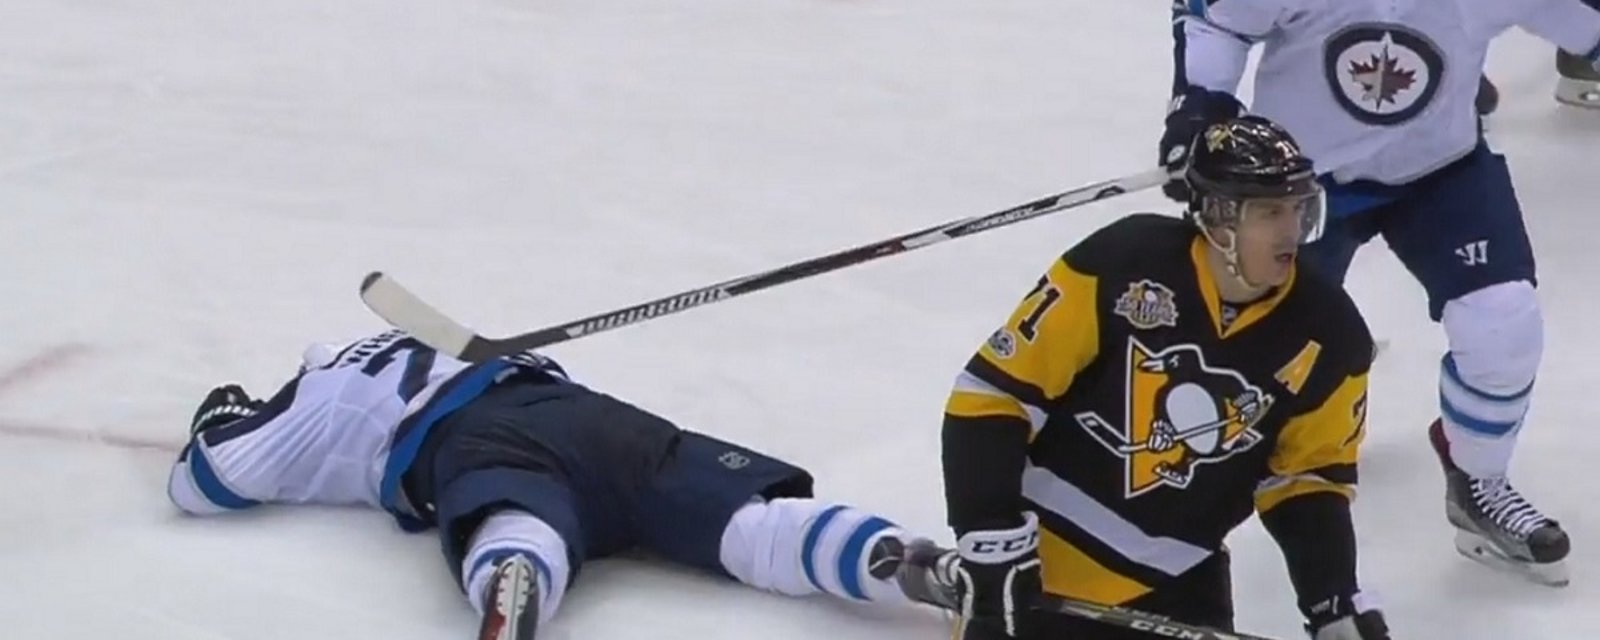 Penguins send Jets a message before what is expected to be a bloody rematch.